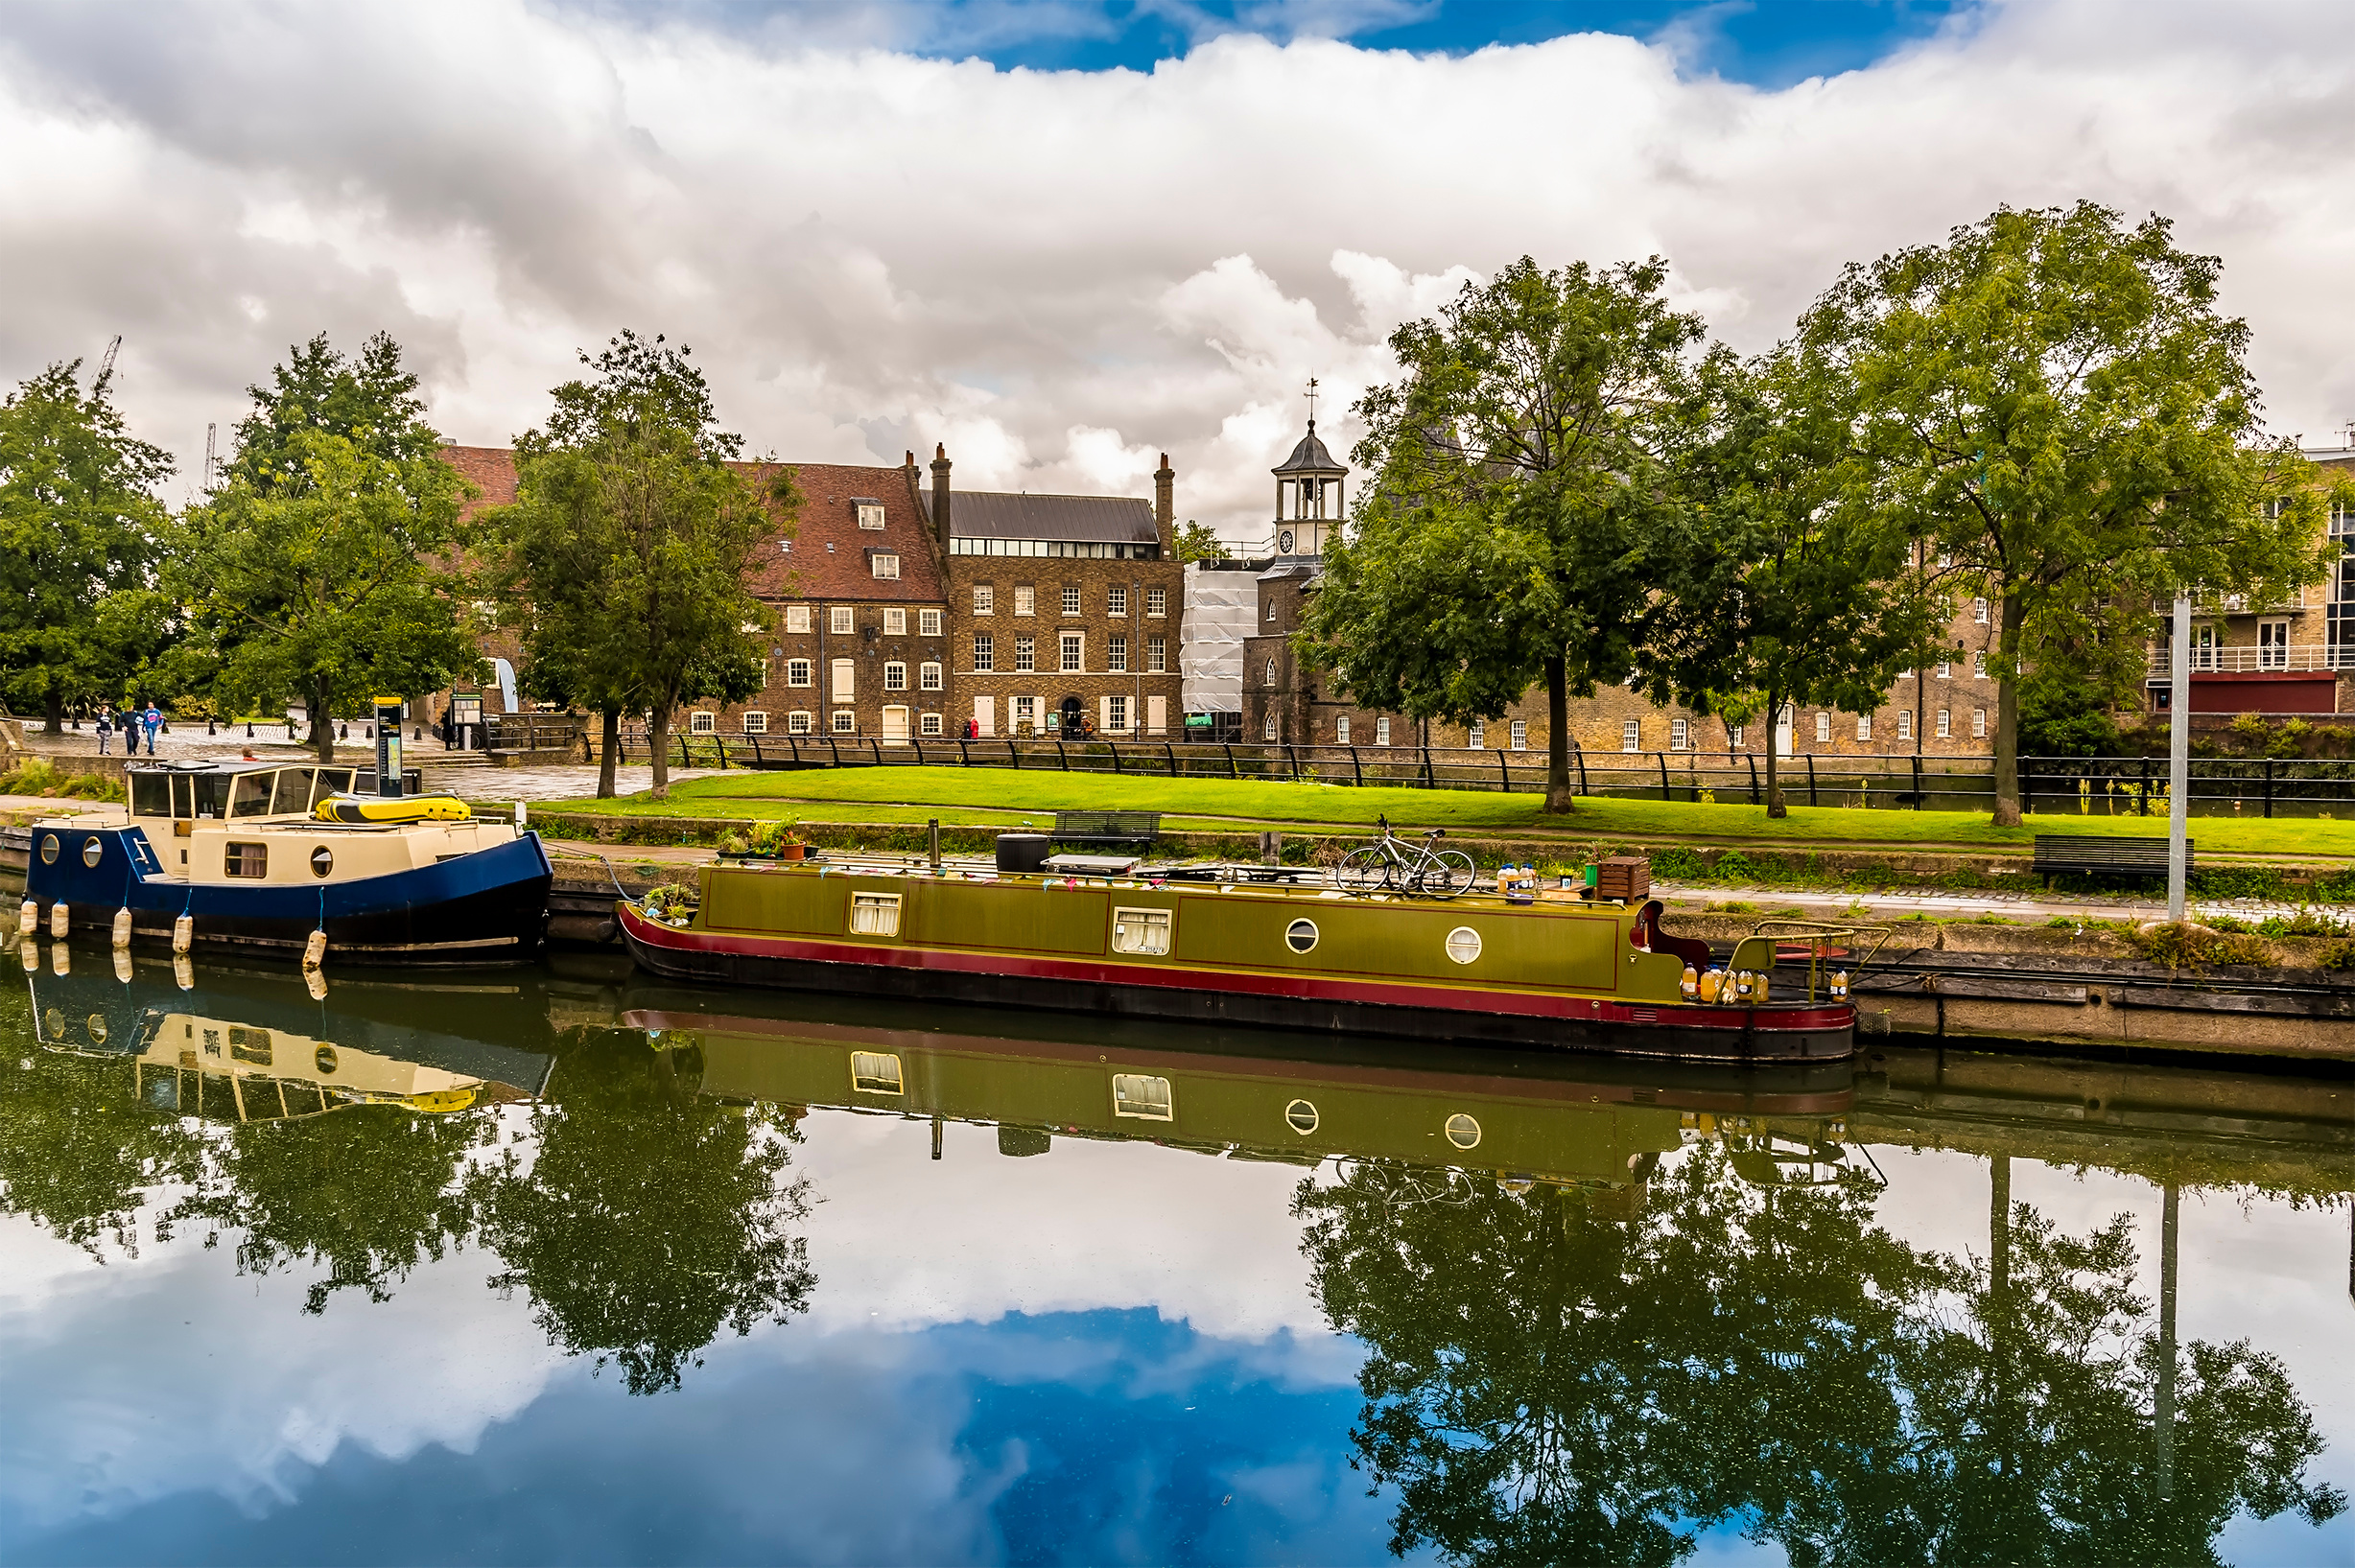 A view across the River Lee towards the Three Mills, part of the oldest tidal mills complex in the world in Lee Valley, London in the summertime